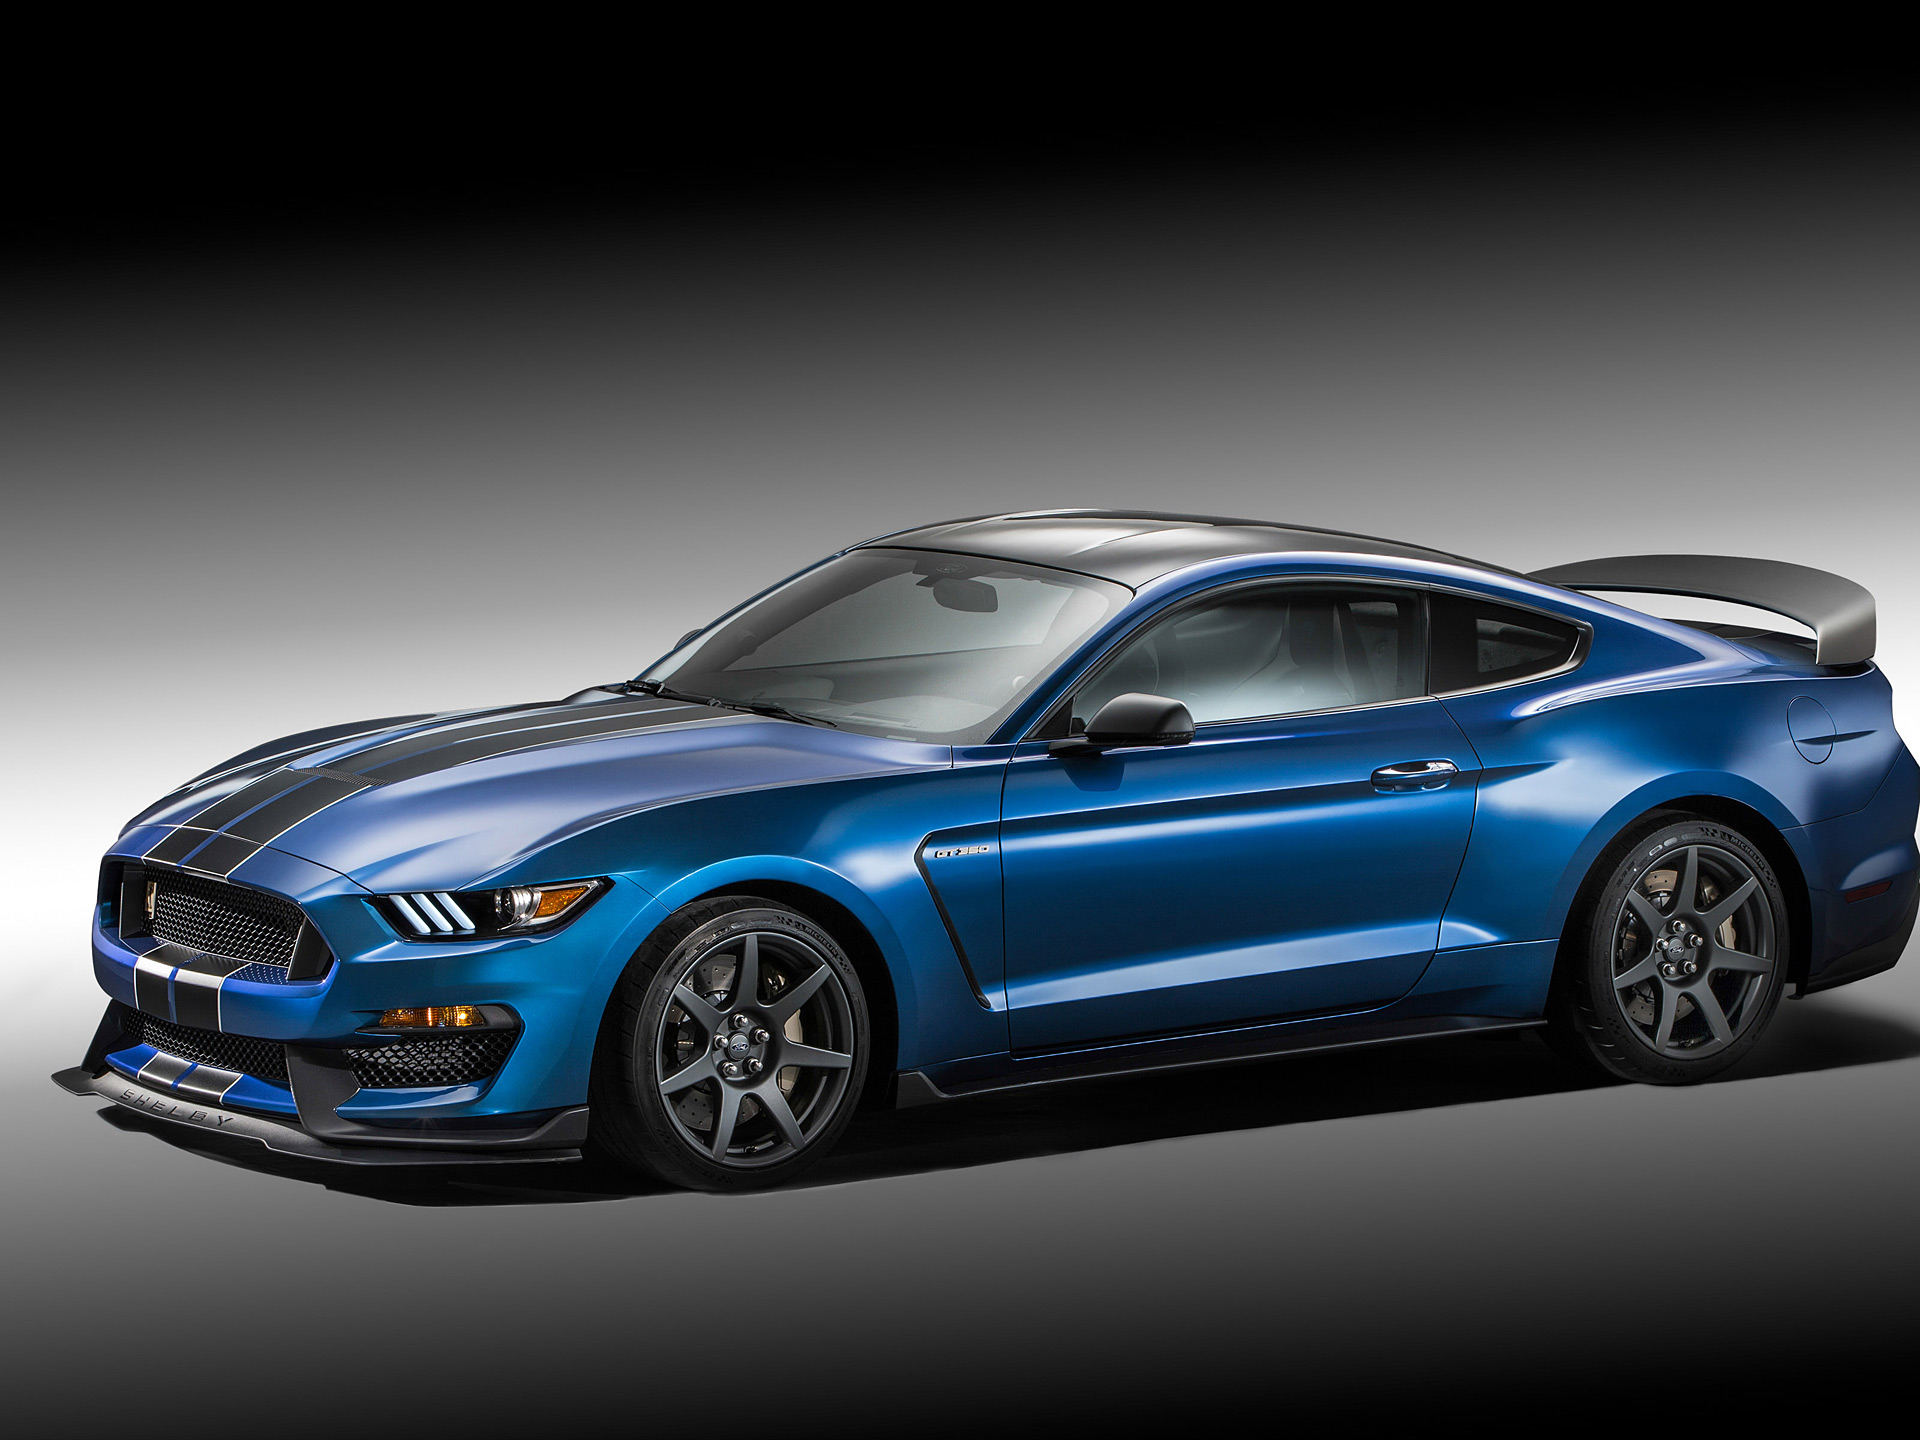  2016 Ford Shelby Mustang GT350R Wallpaper.